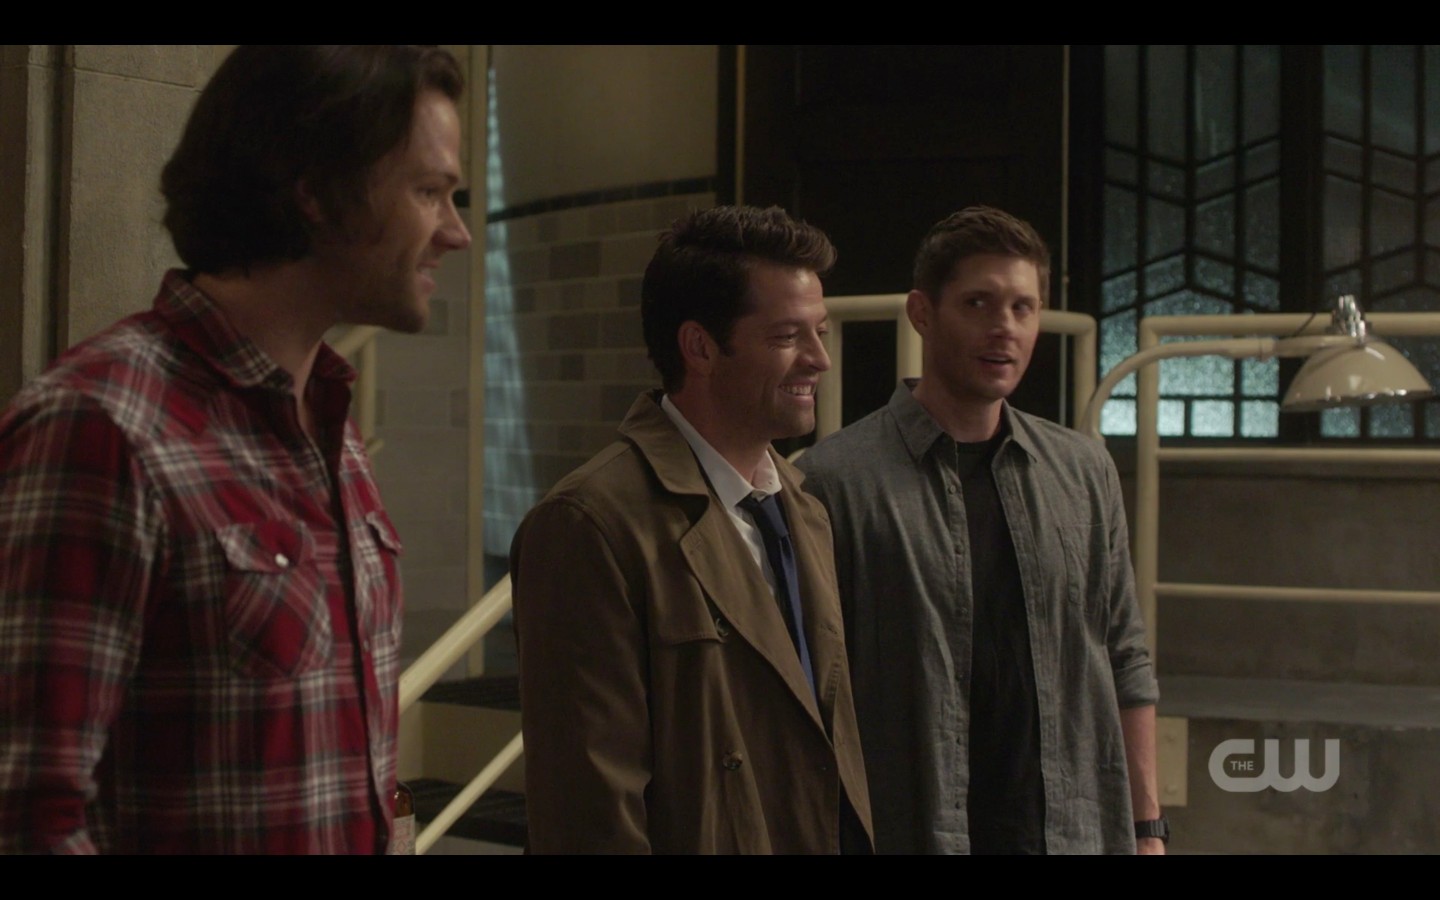 sam dean winchester castiel thinks spell saves jack but doesn't